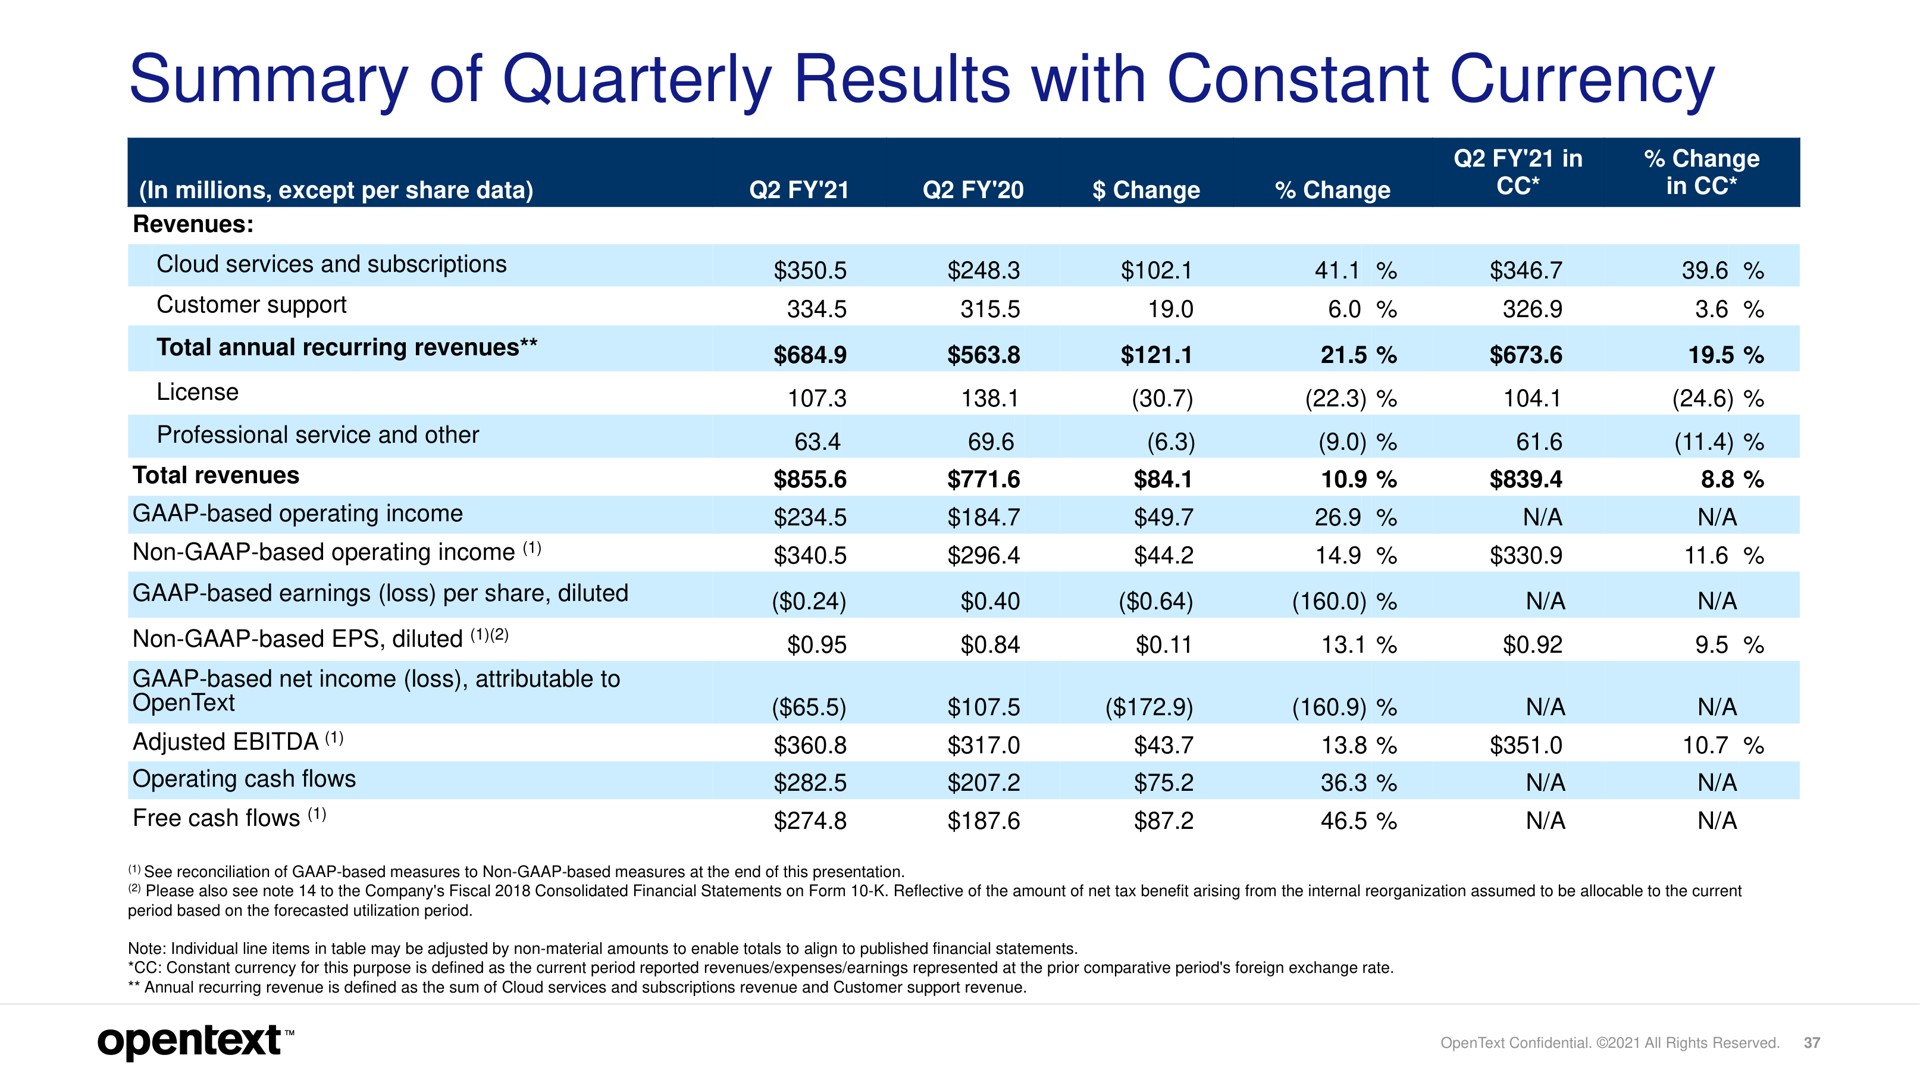 summary of quarterly results with constant currency | OpenText